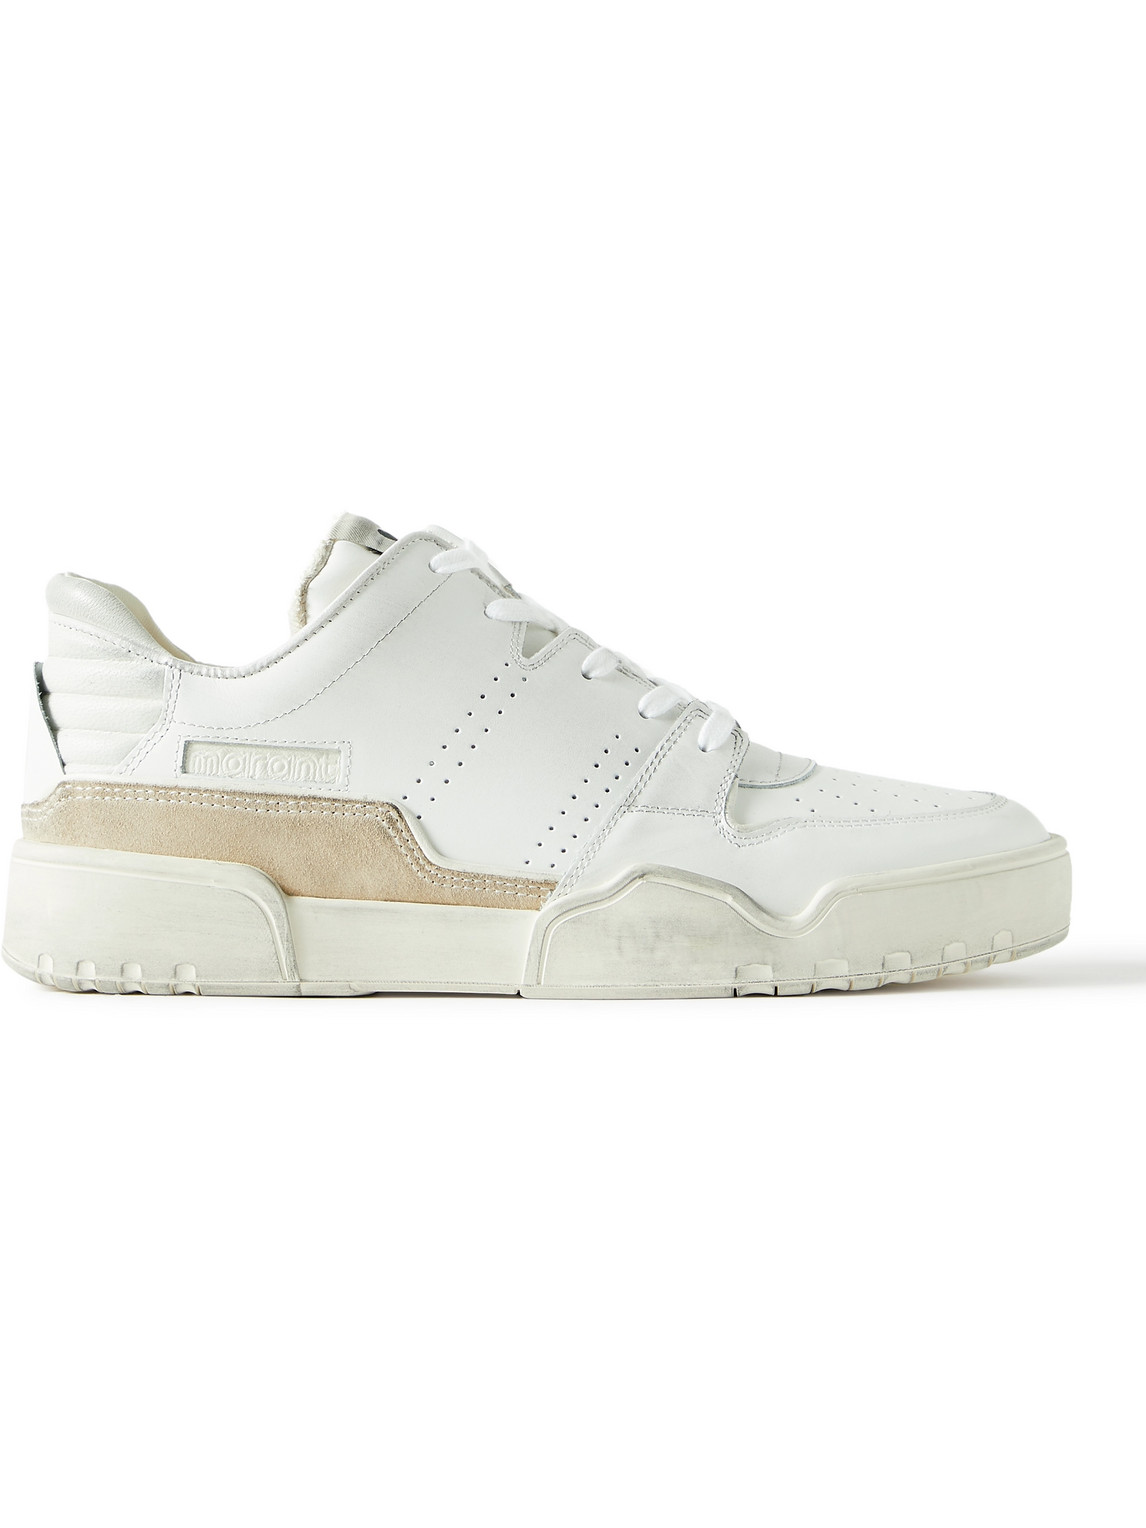 ISABEL MARANT STADIUM SUEDE-TRIMMED LEATHER SNEAKERS